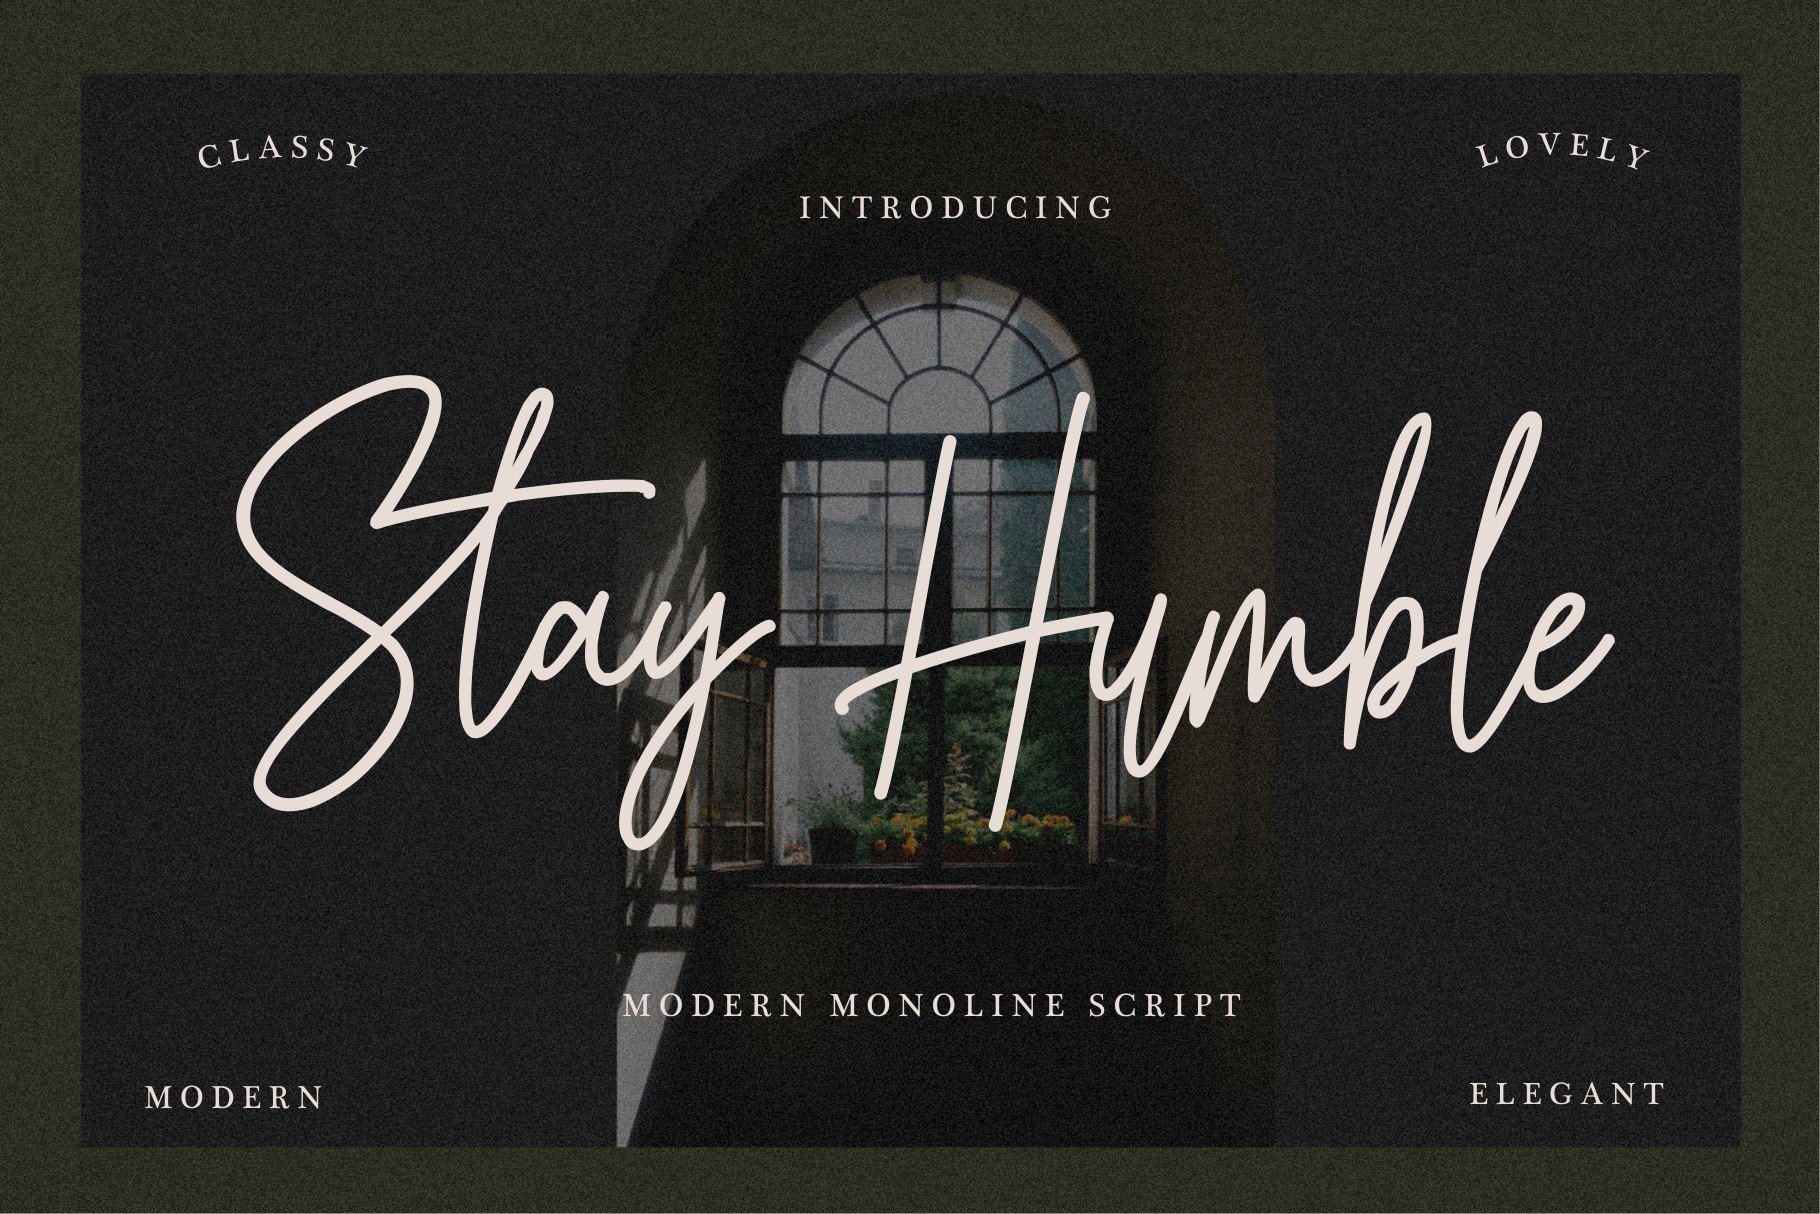 Stay Humble - Modern Monoline Script cover image.